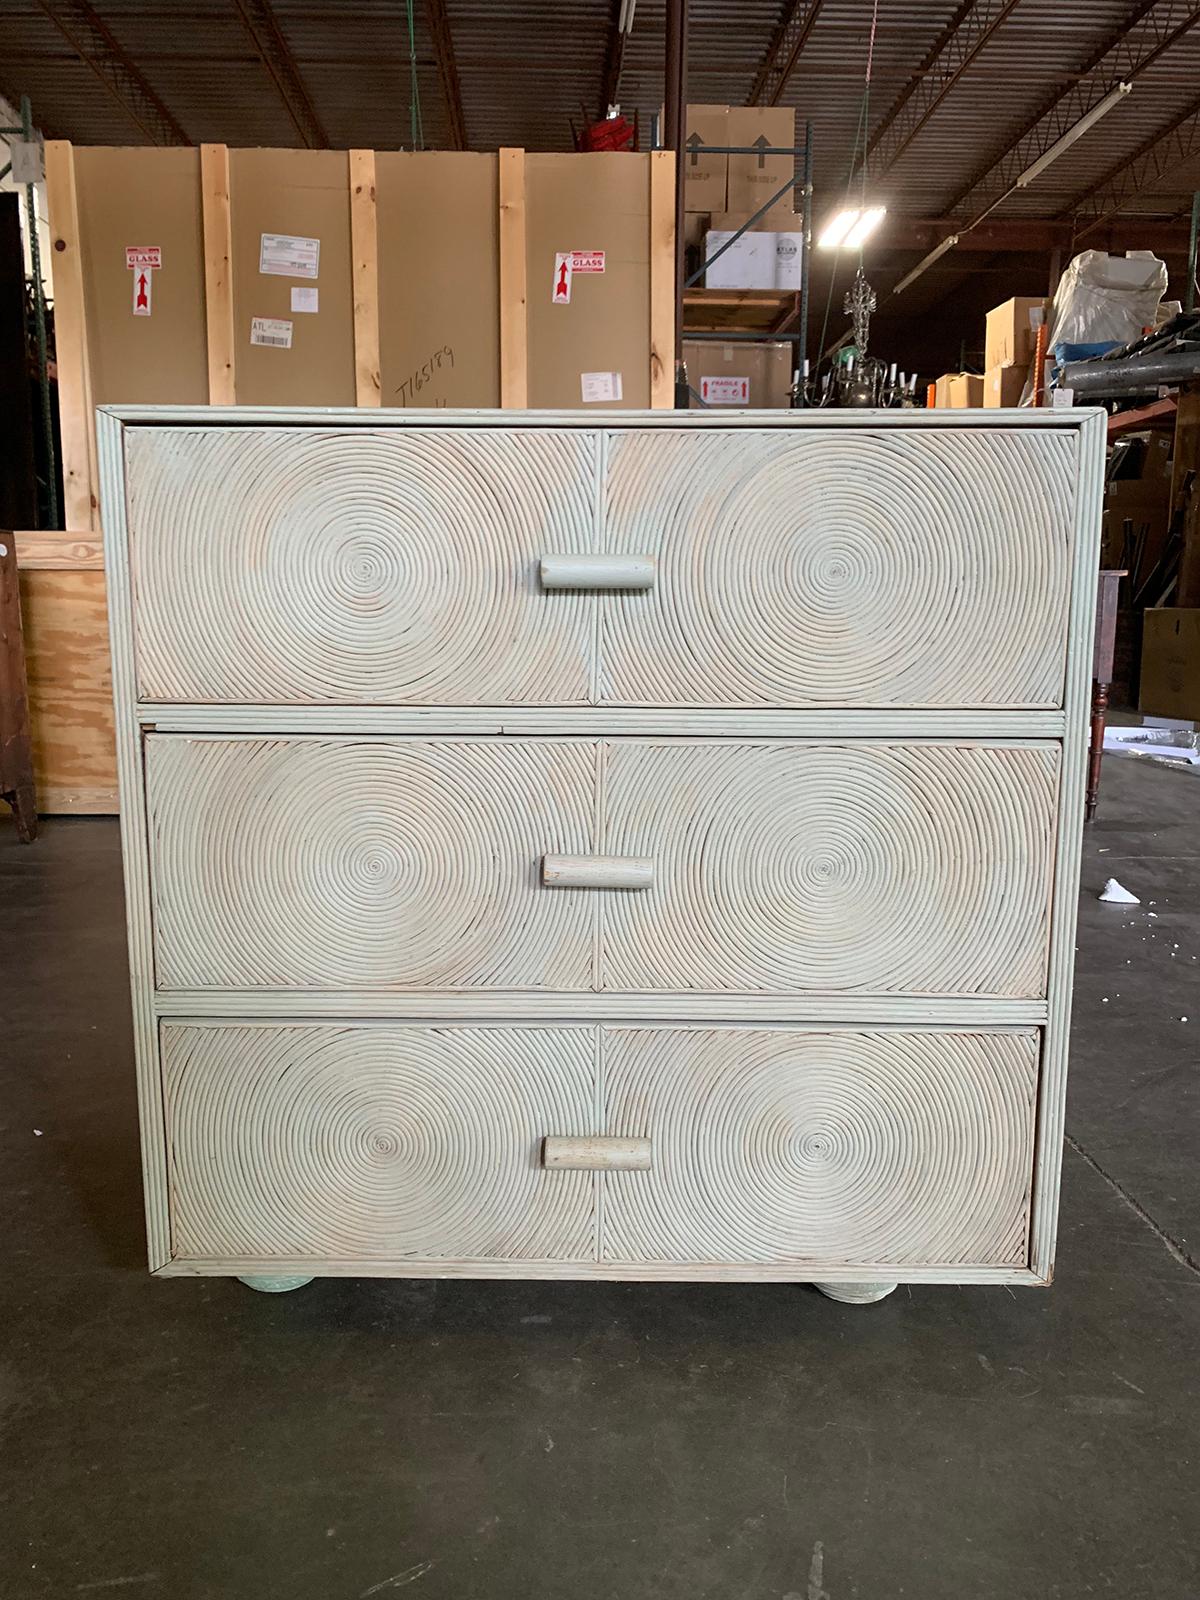 Mid-20th century Luan wood painted chest with concentric circles, circa 1930-1950s
One-of-a-kind style and color.